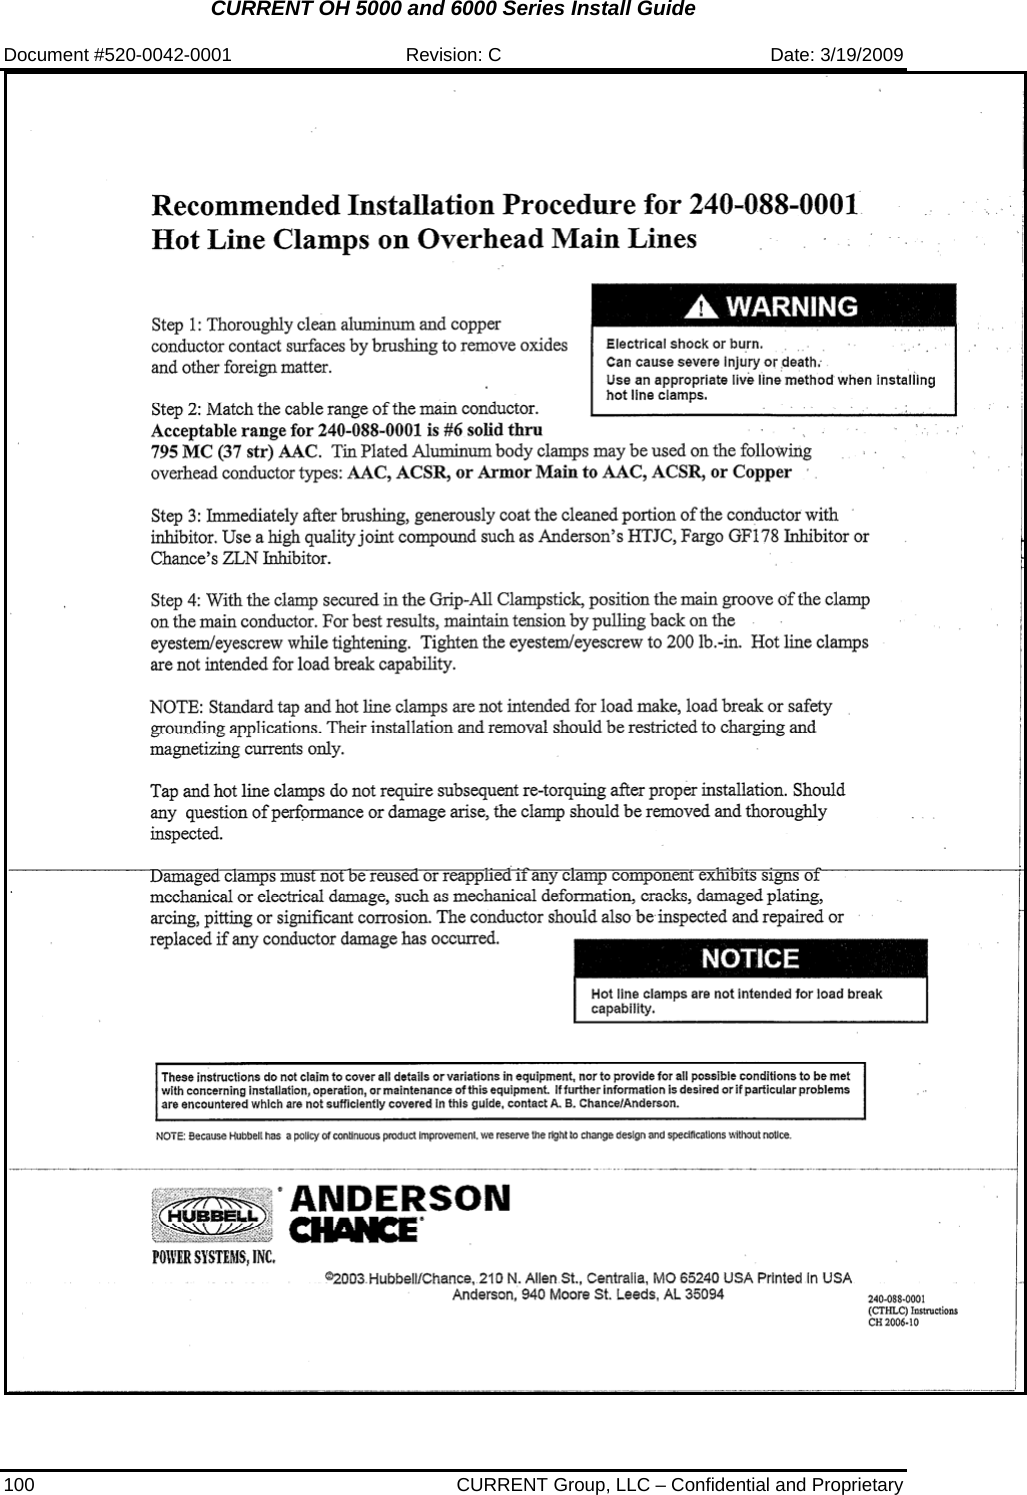 CURRENT OH 5000 and 6000 Series Install Guide  Document #520-0042-0001  Revision: C  Date: 3/19/2009 100  CURRENT Group, LLC – Confidential and Proprietary 